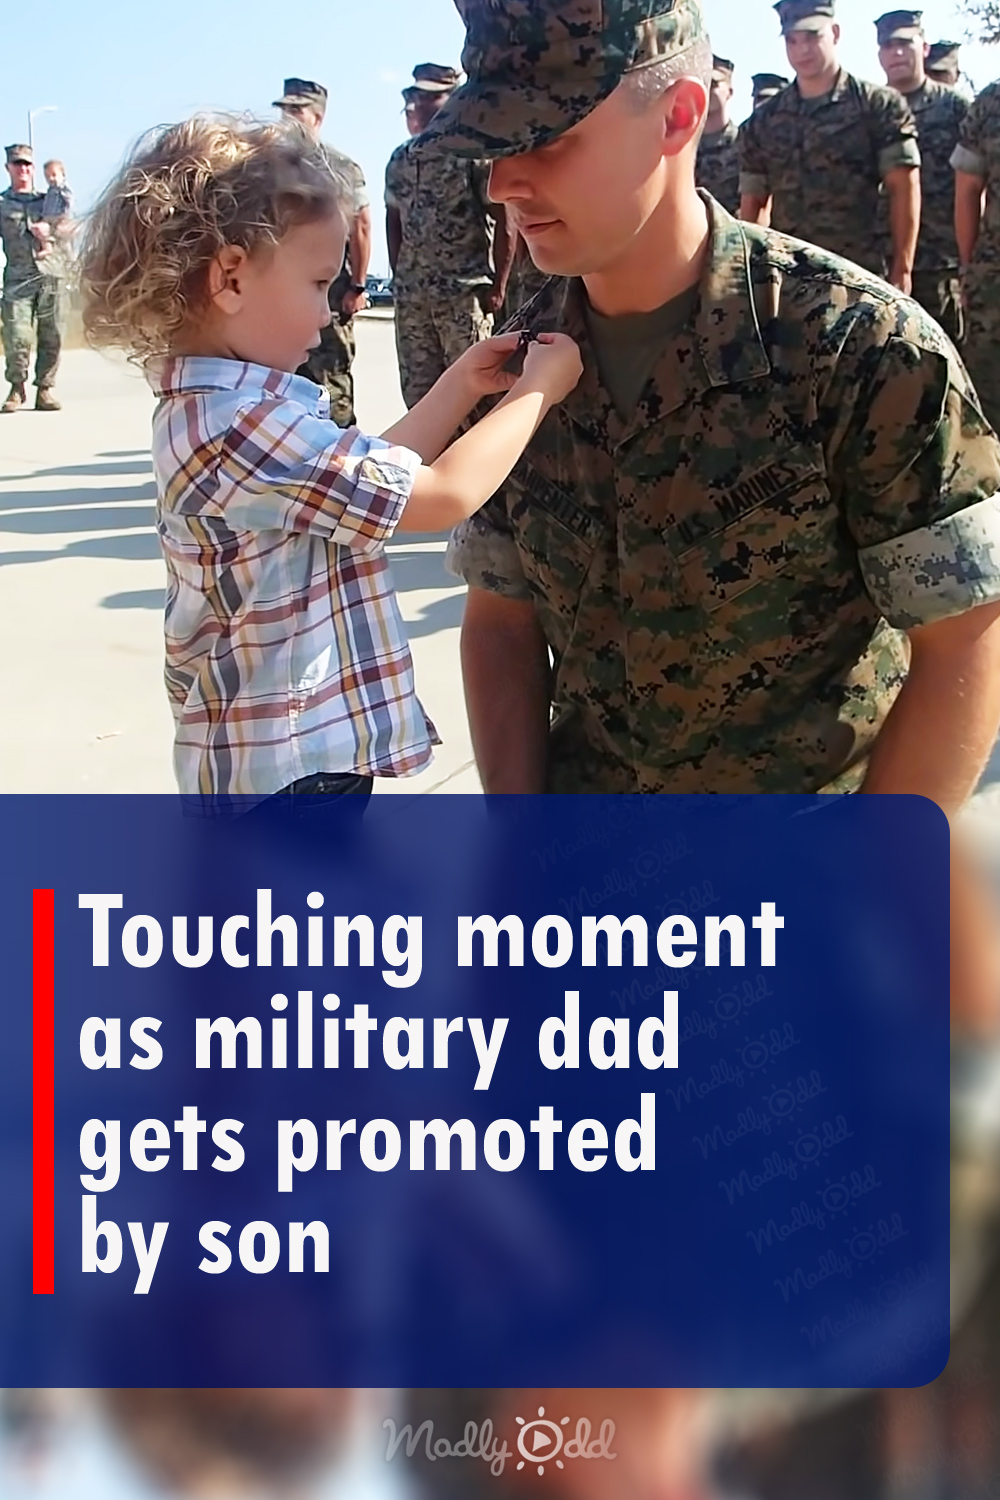 Touching moment as military dad gets promoted by son